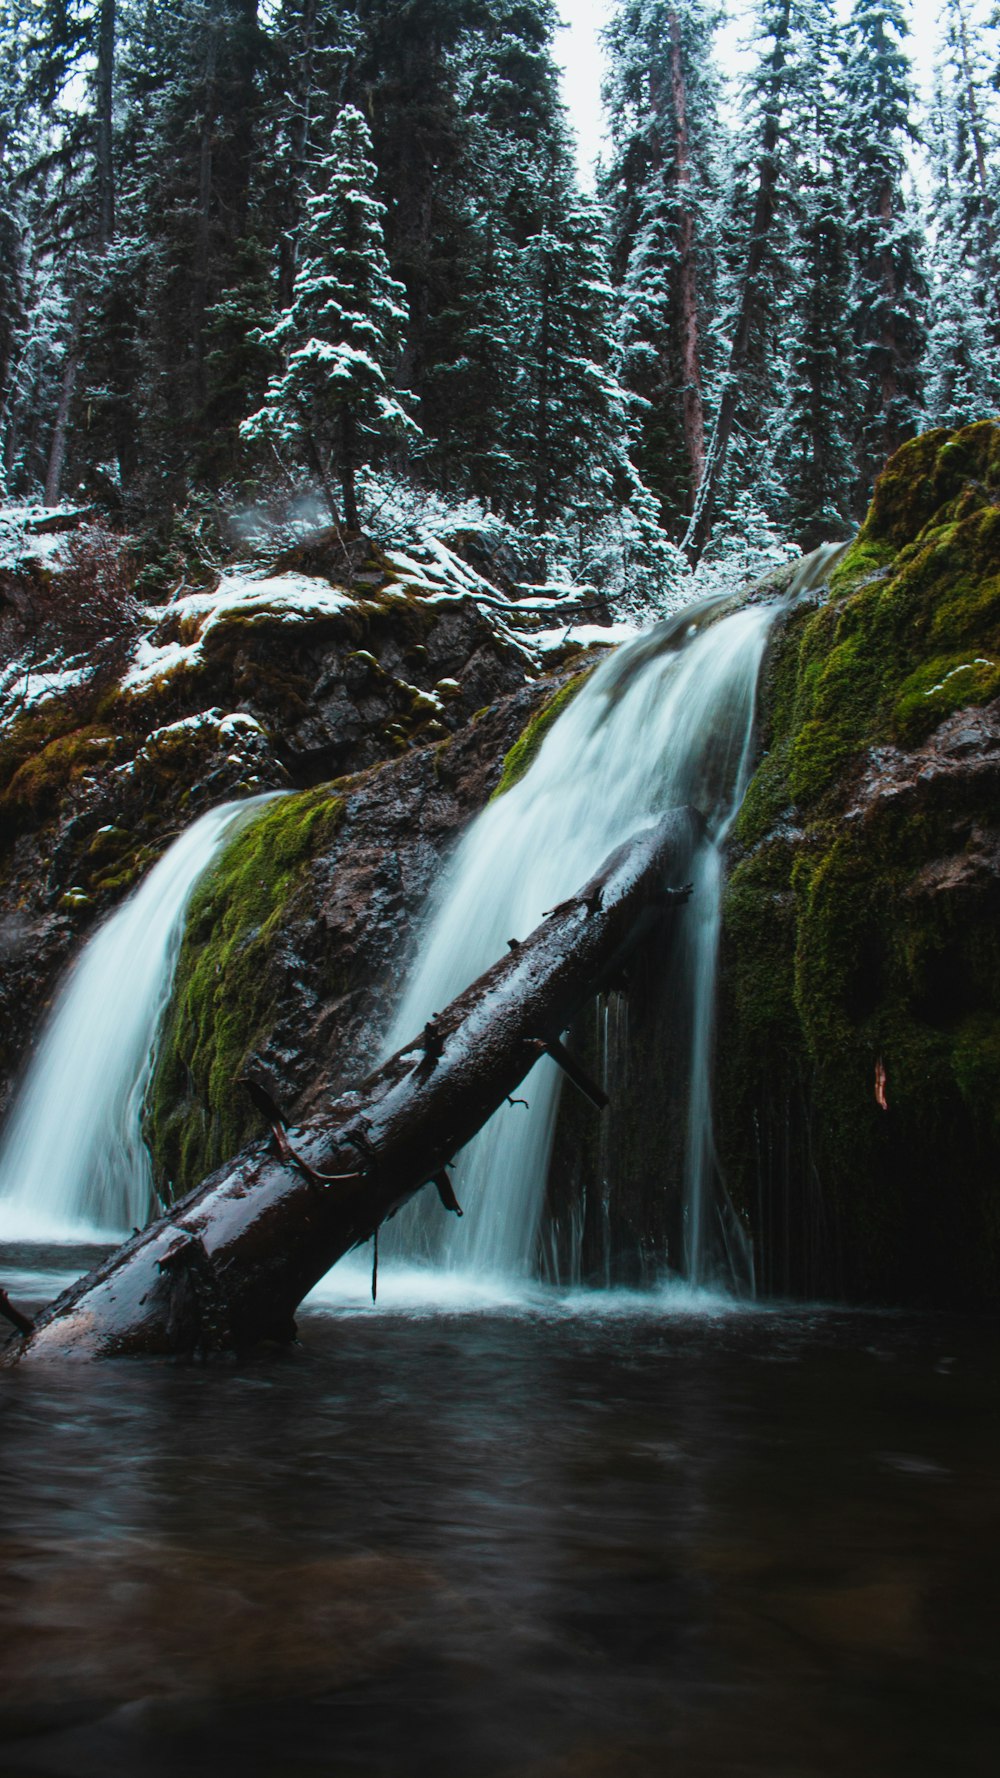 a waterfall with a fallen log in the middle of it